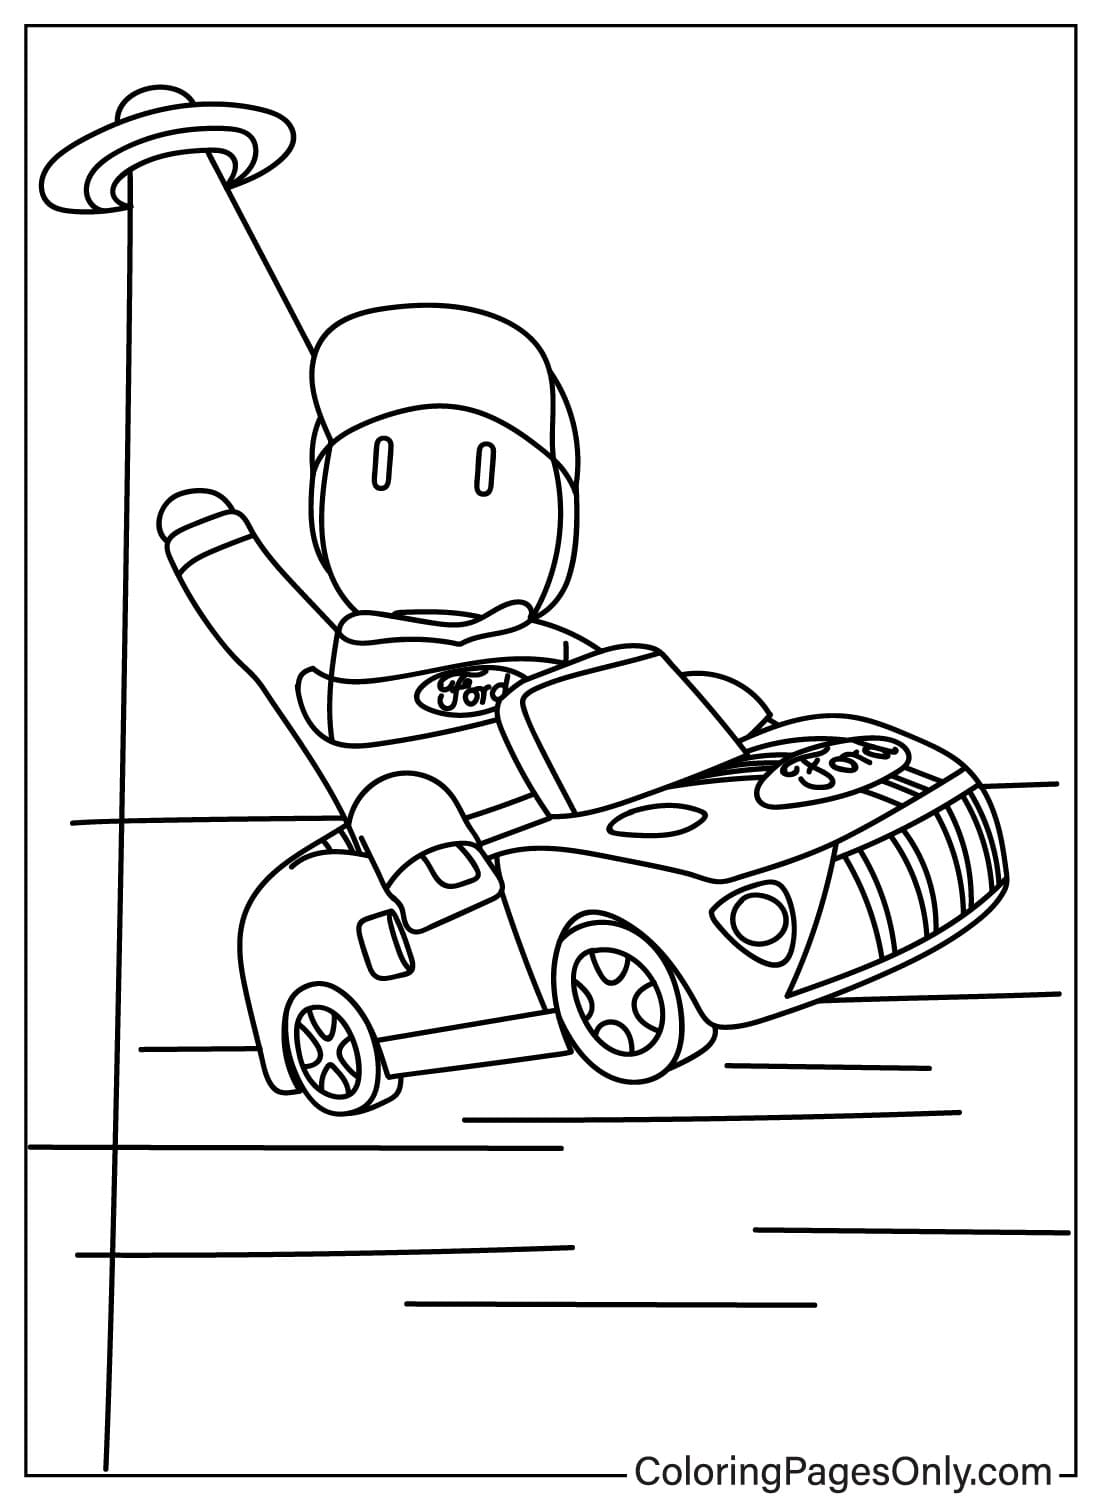 Printable Stumble Guys Coloring Page from Stumble Guys